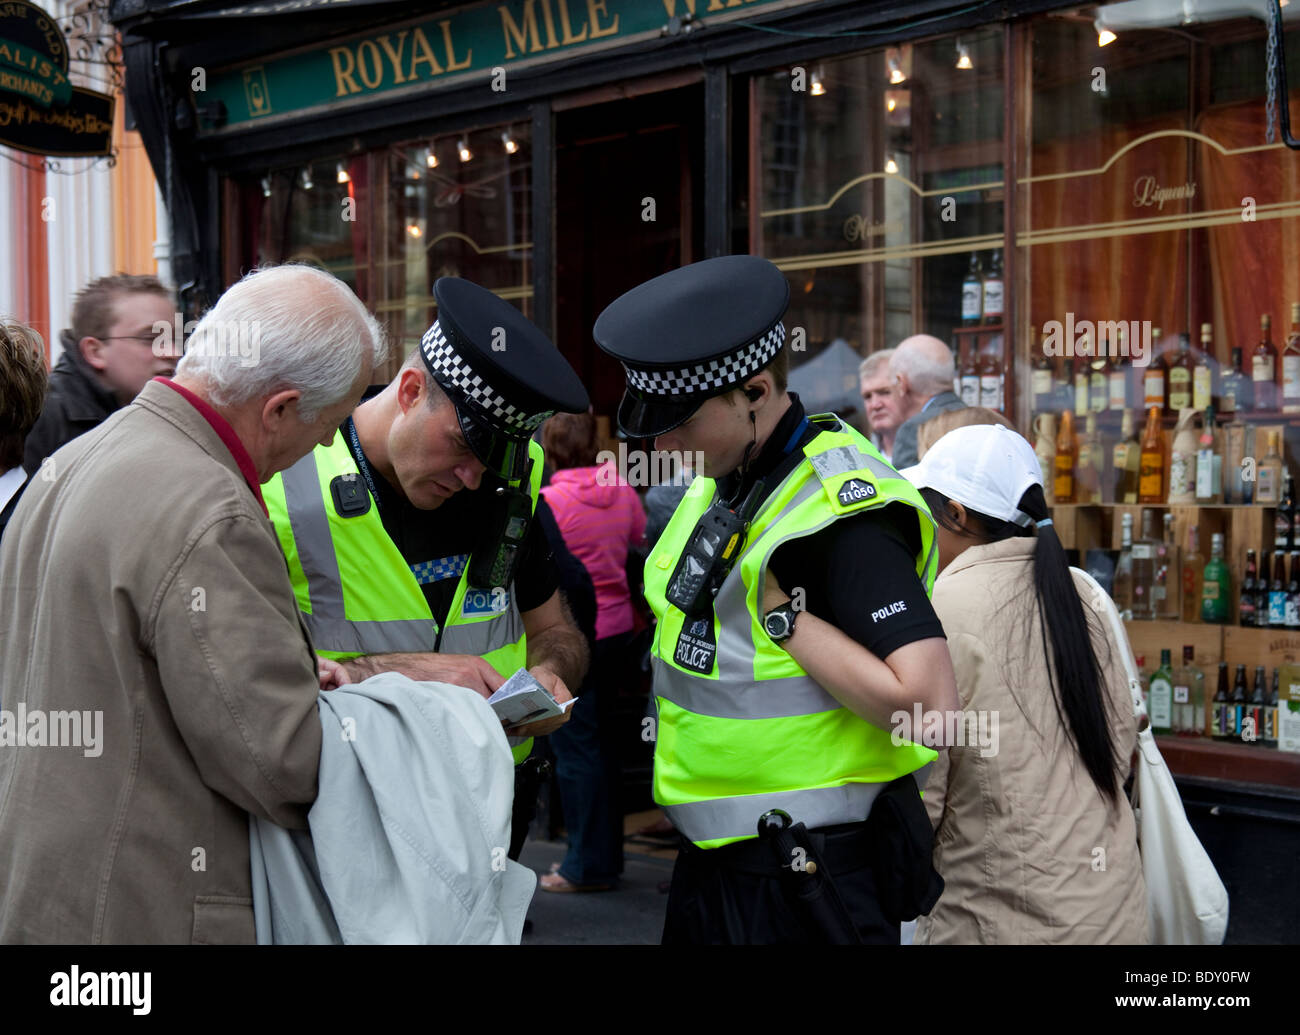 Two male Police Officers assist man with directions, Royal Mile Edinburgh Scotland UK Europe Stock Photo